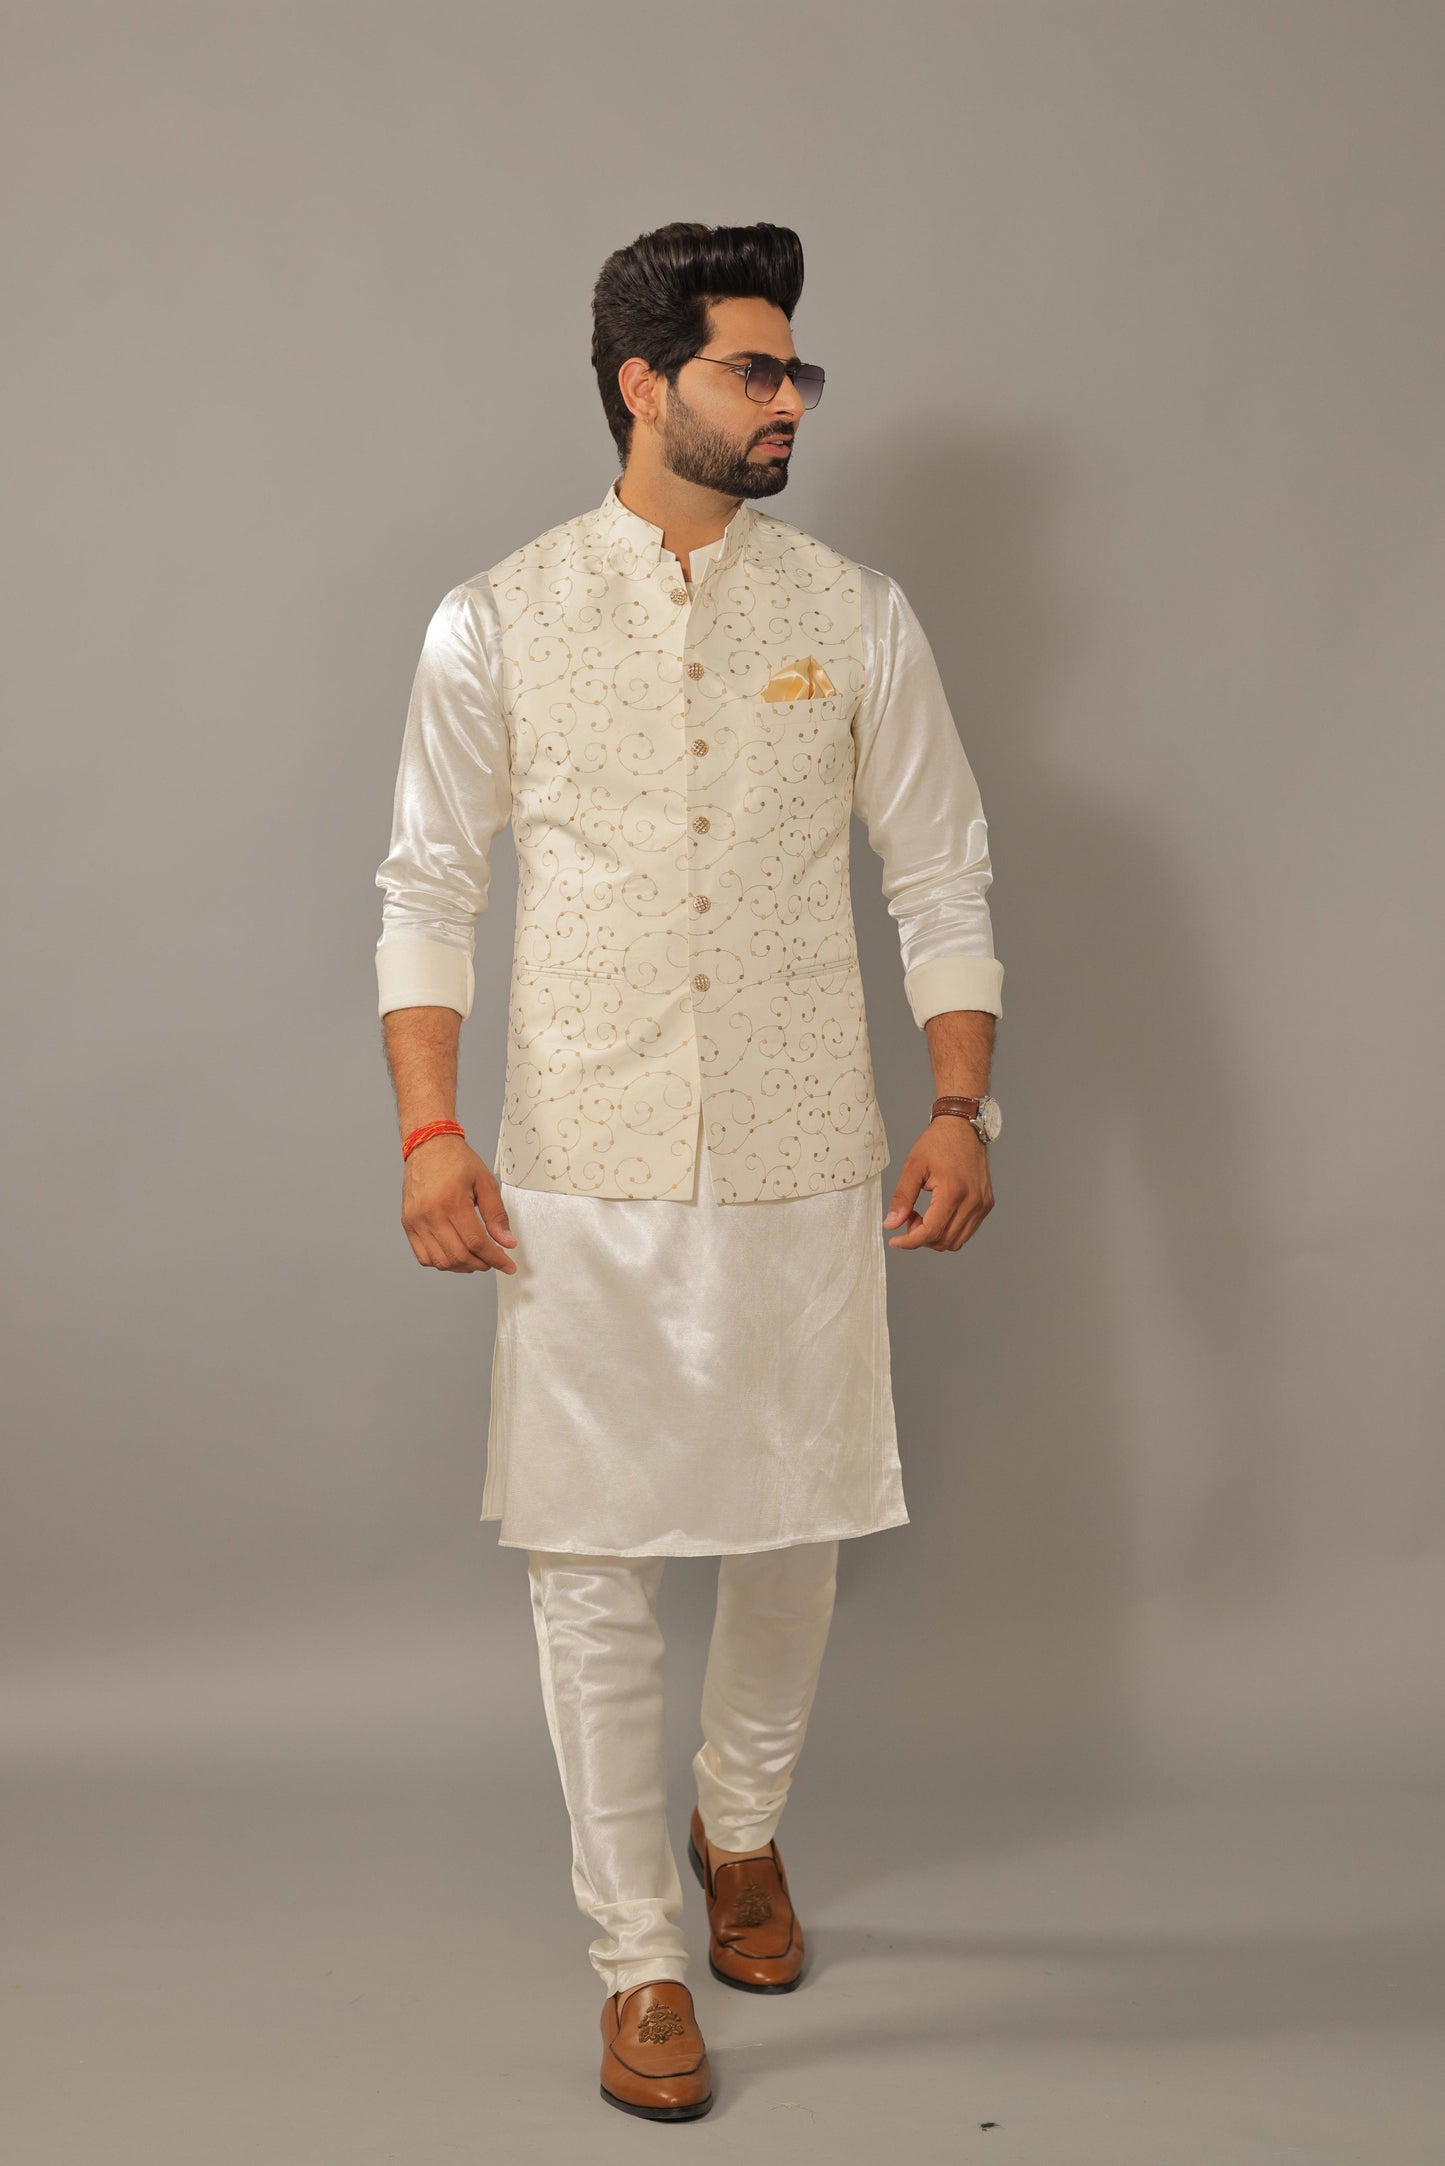 Off White Kurta Payjama Set With Floral Embroidery Jacket -Handcrafted